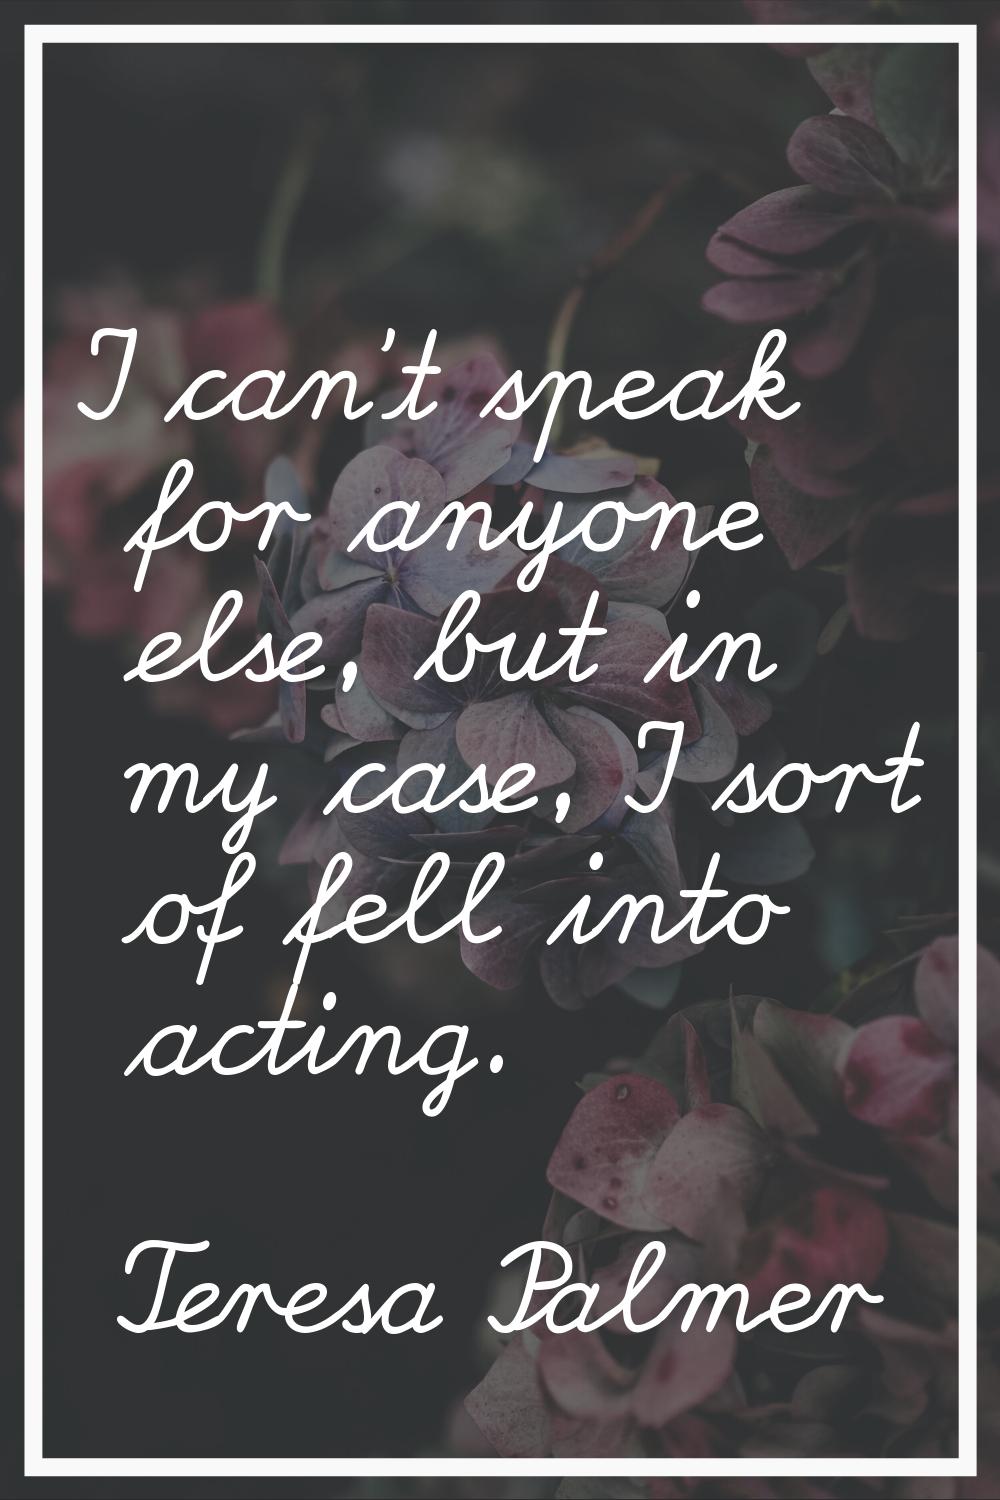 I can't speak for anyone else, but in my case, I sort of fell into acting.